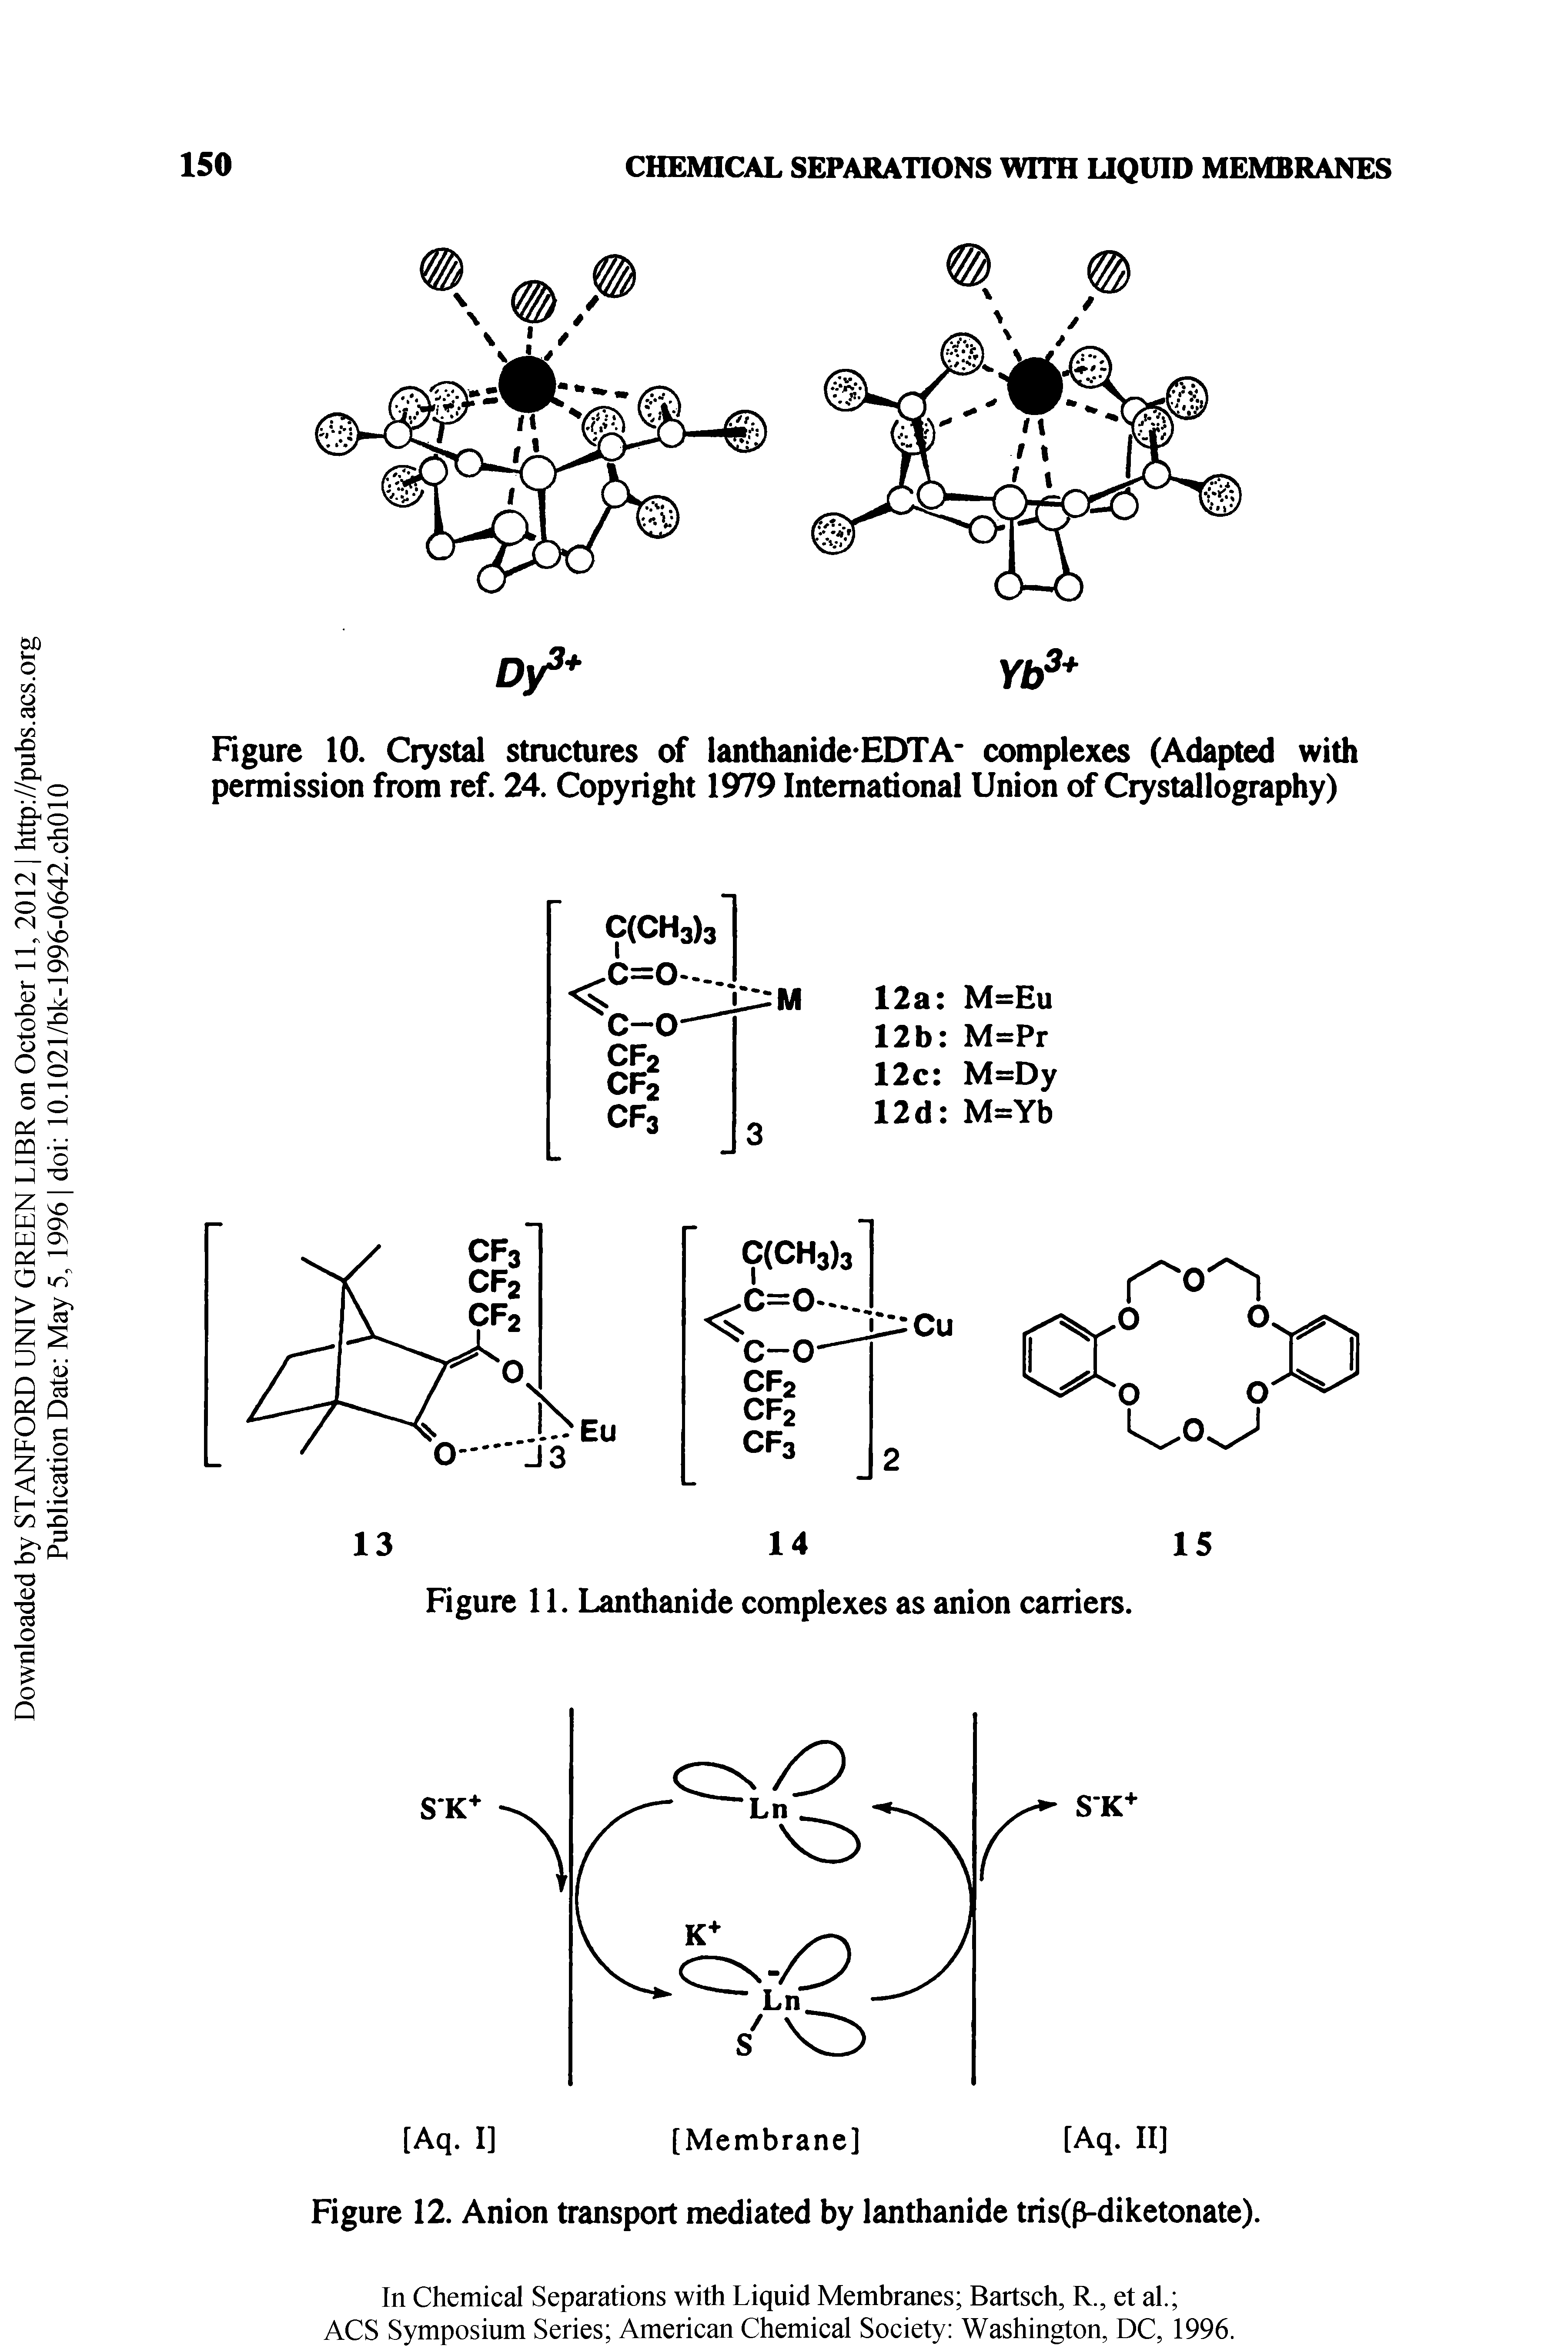 Figure 10. Crystal structures of lanthanide EDTA complexes (Adapted with permission from ref. 24. Copyright 1979 International Union of Crystallography)...